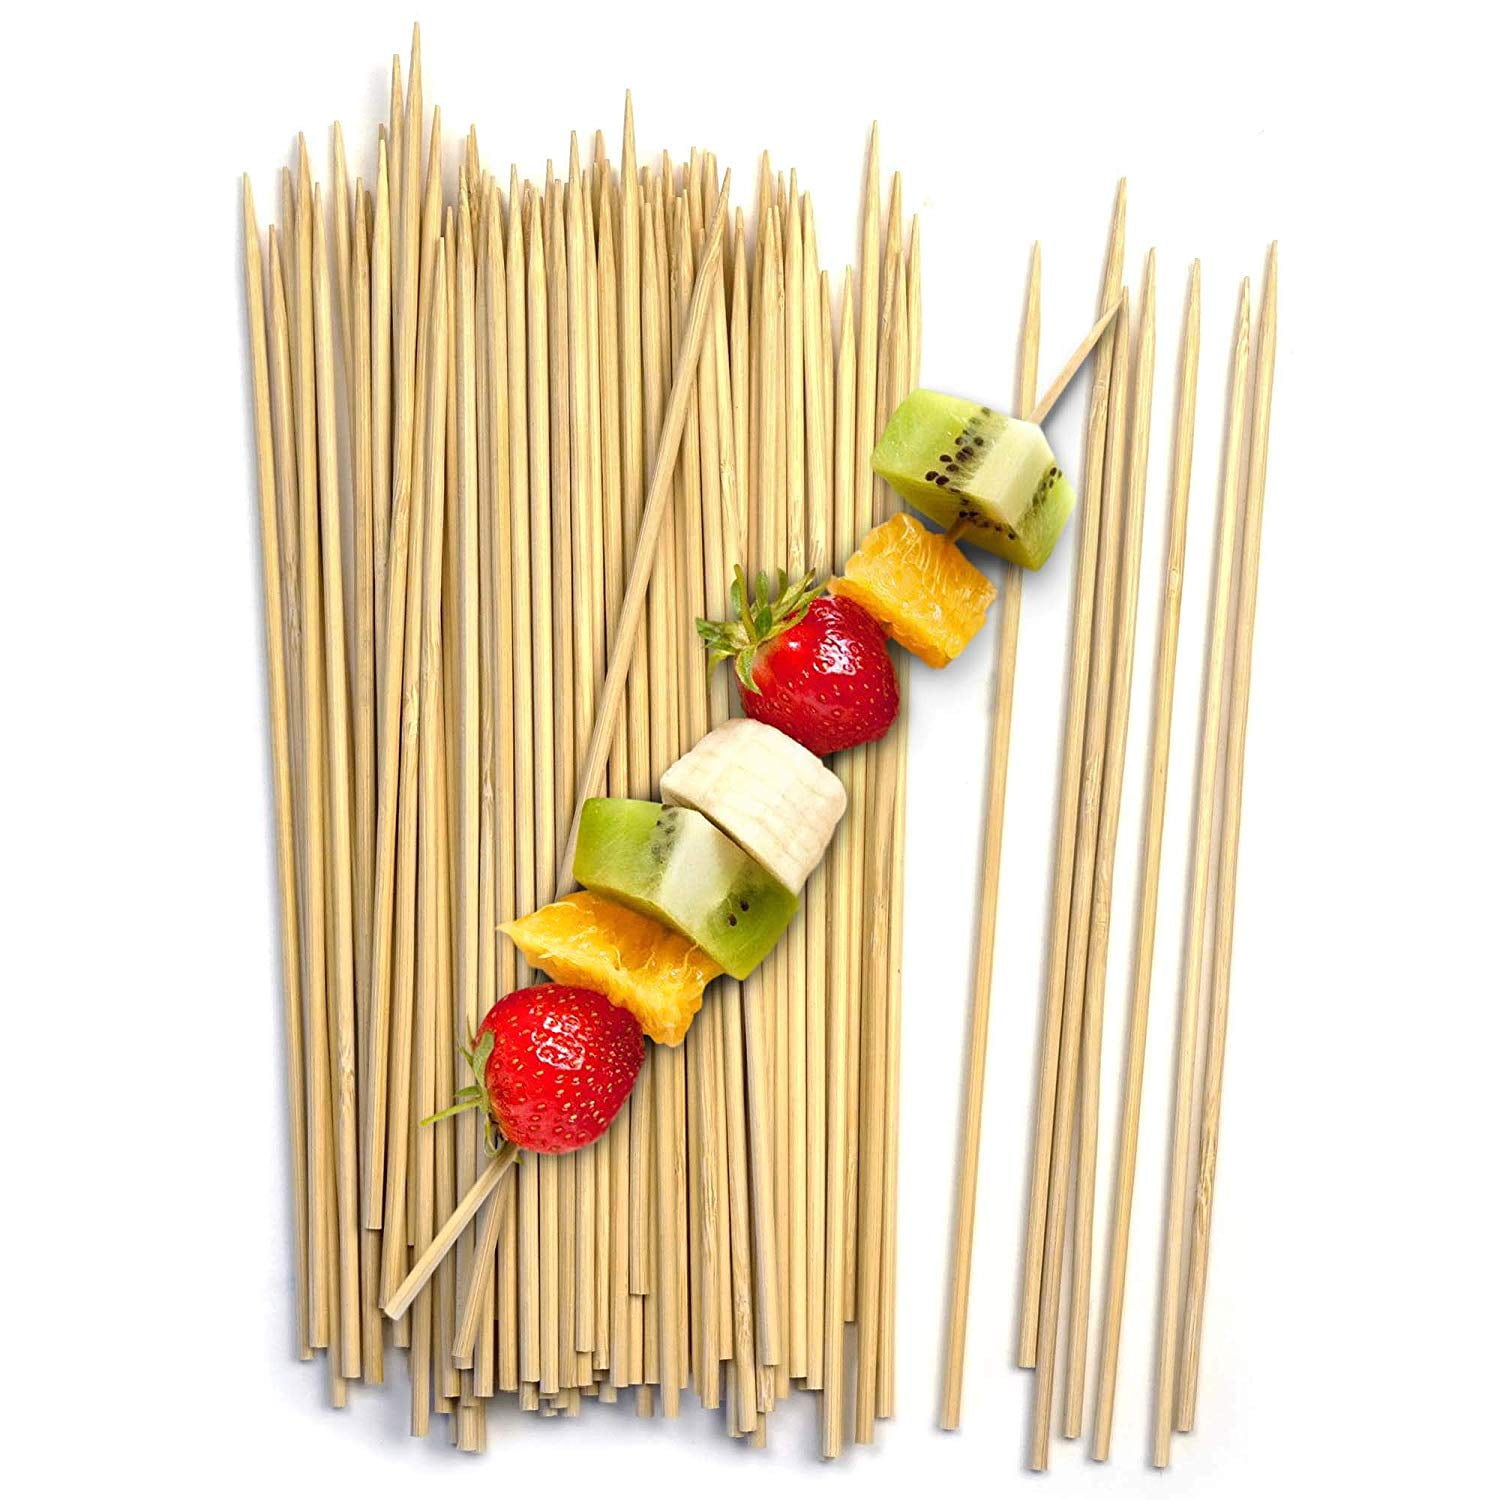 Pack of 300 Thin Bamboo Skewers for BBQ Shish Kabobs Skewer 